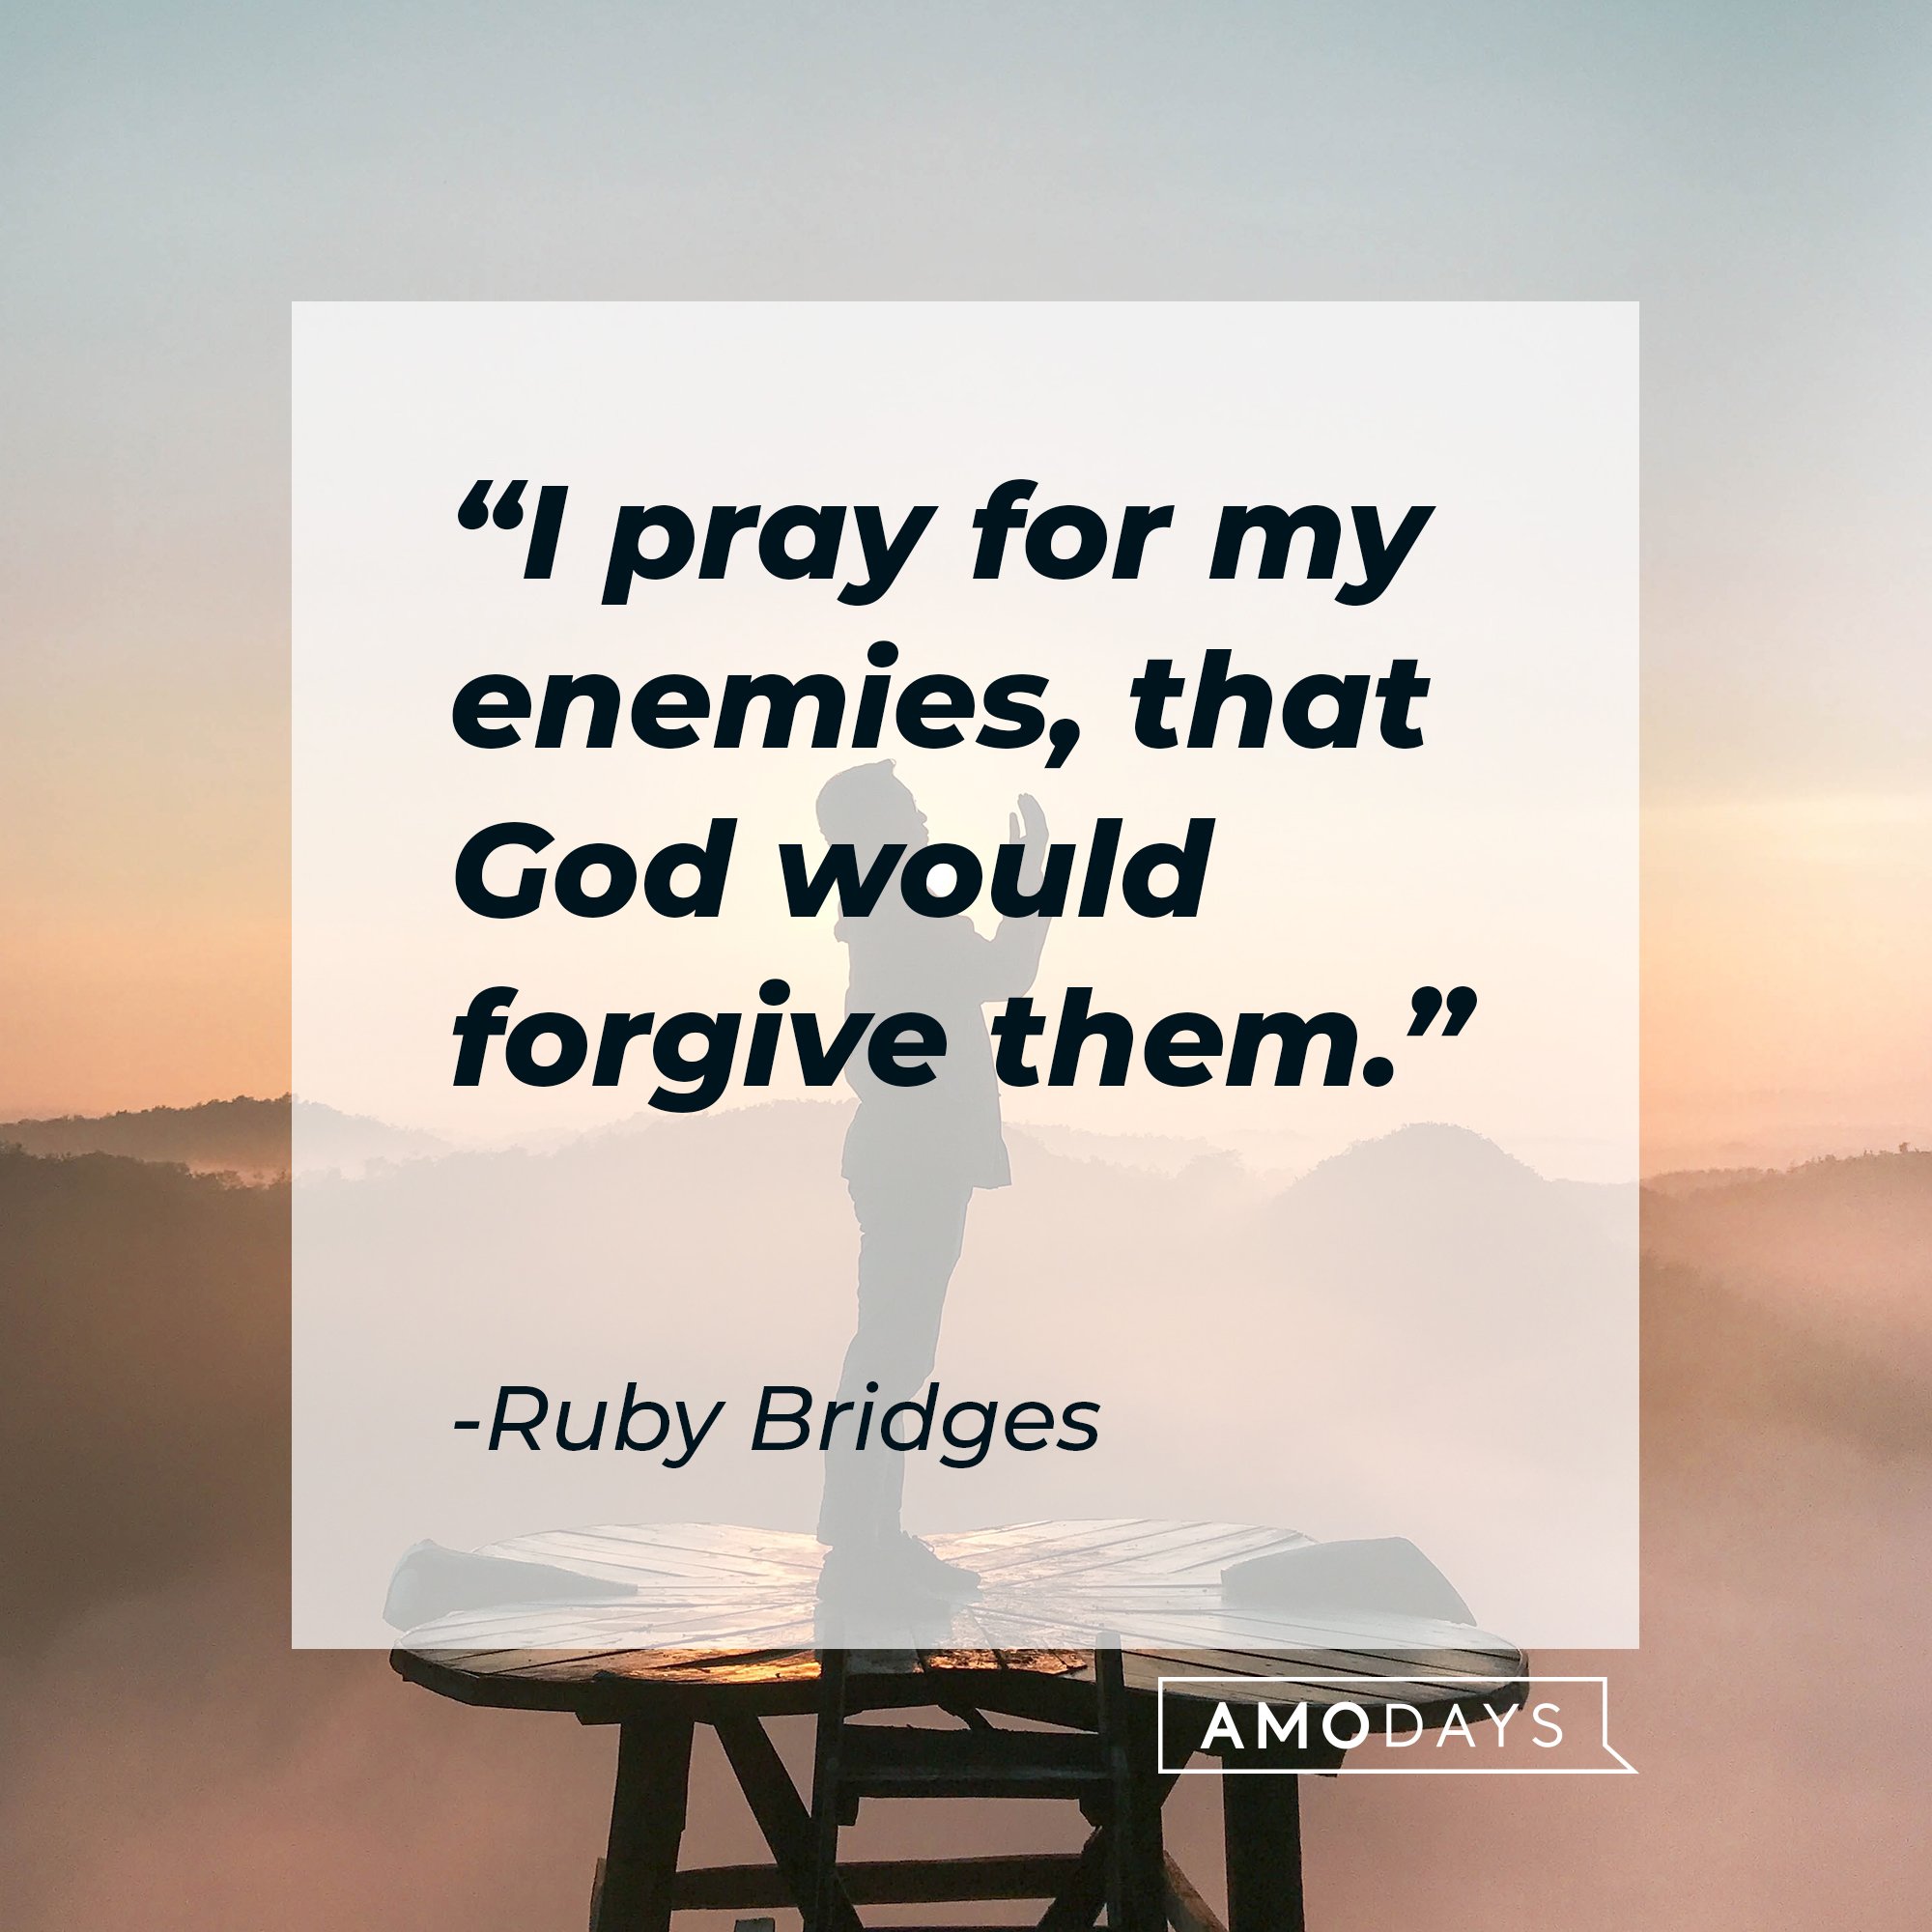 Ruby Bridges’ quotes: “" pray for my enemies, that God would forgive them." | Image: AmoDays 